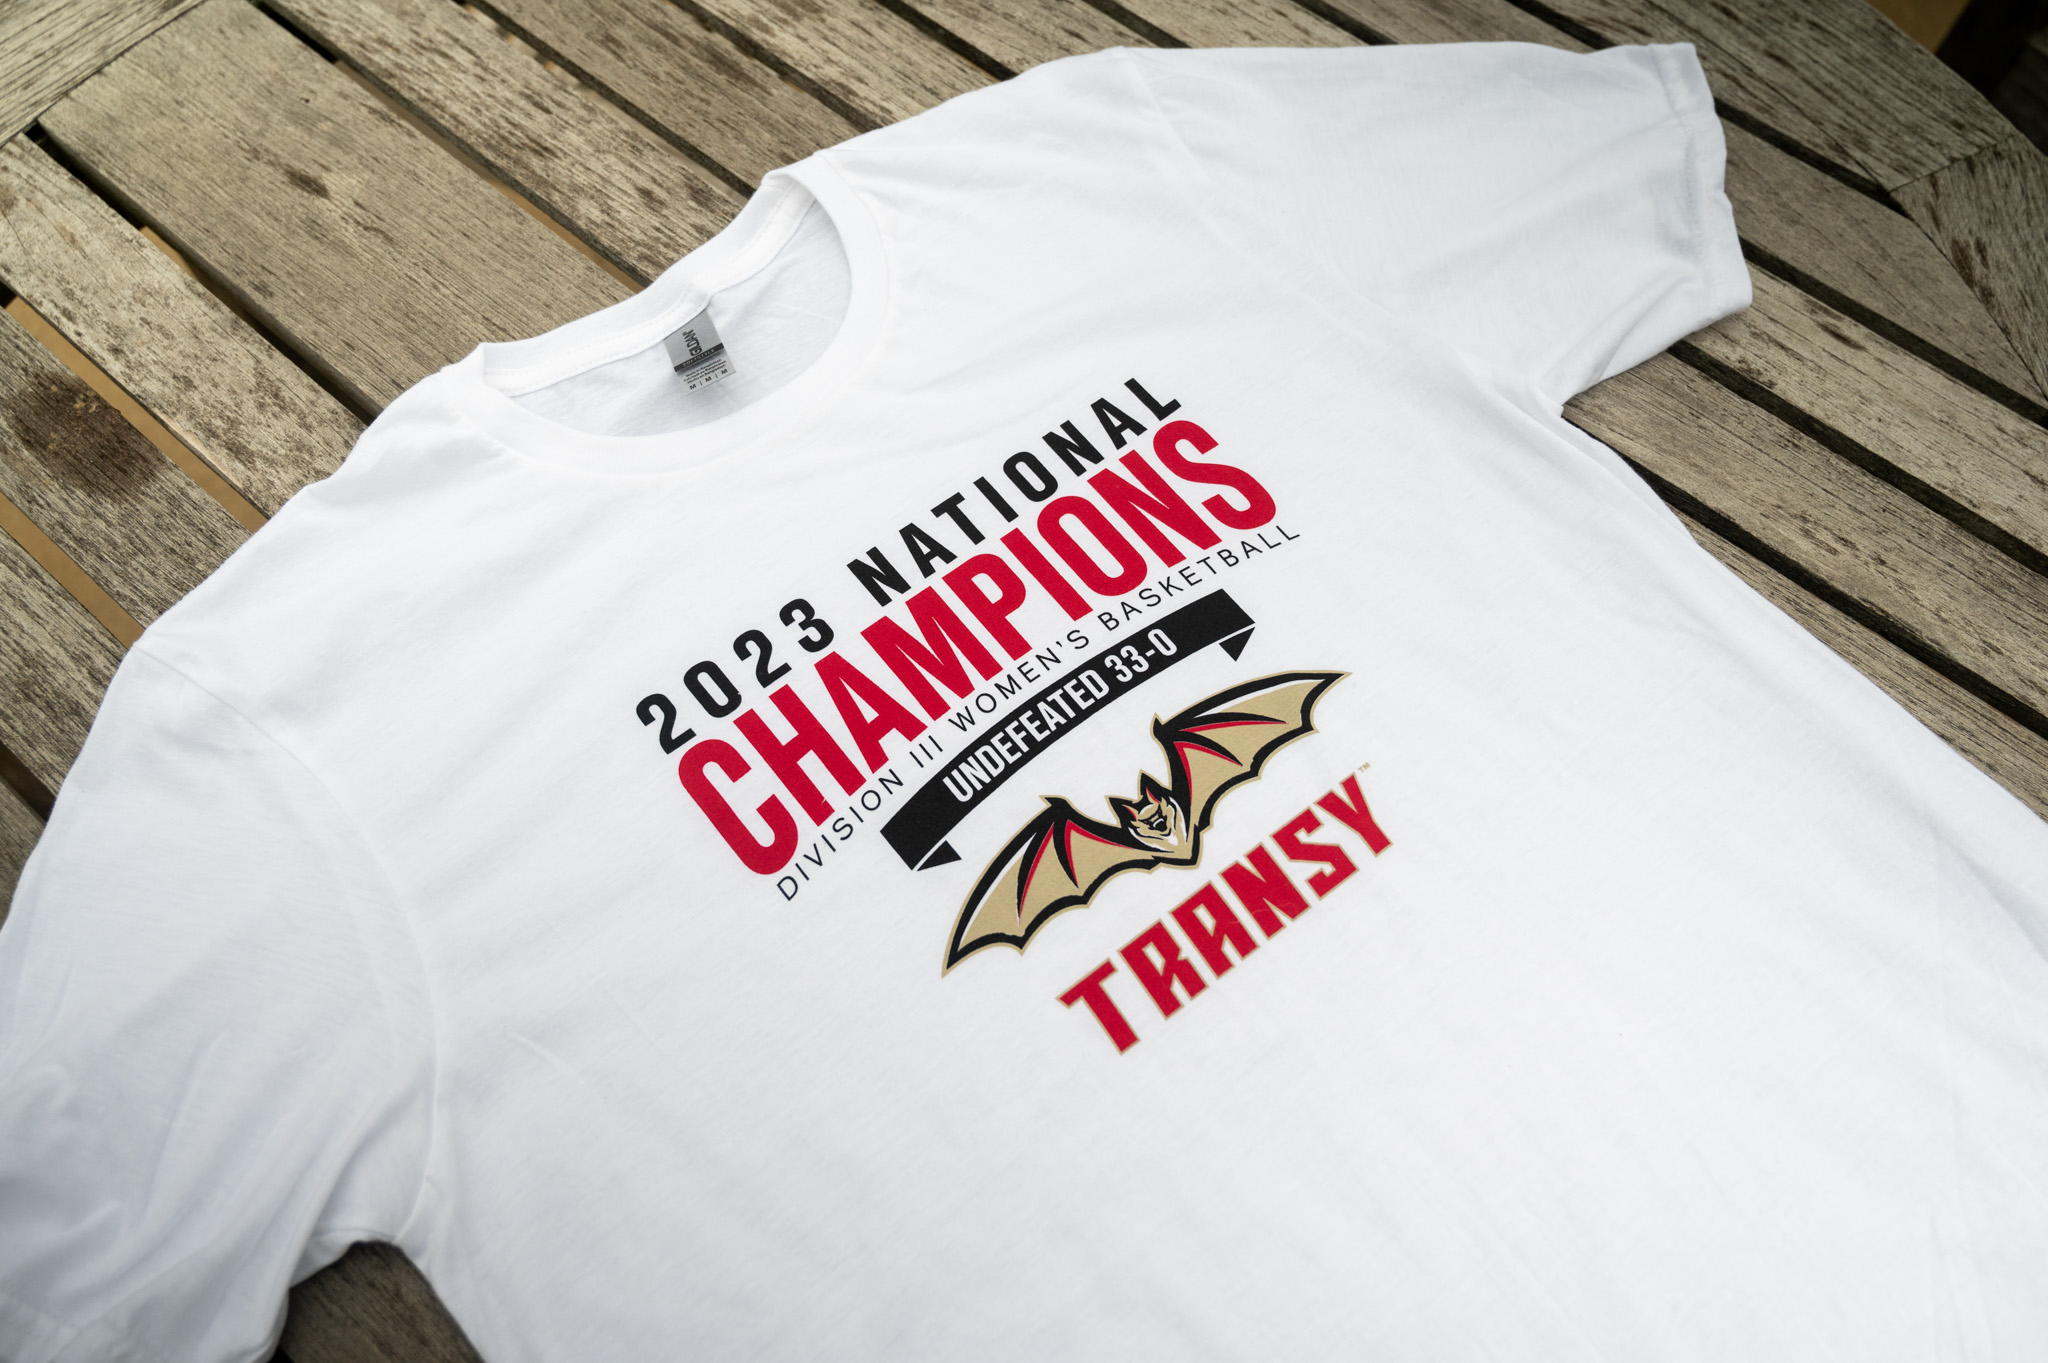 National Championship merchandise still available for purchase on campus, online